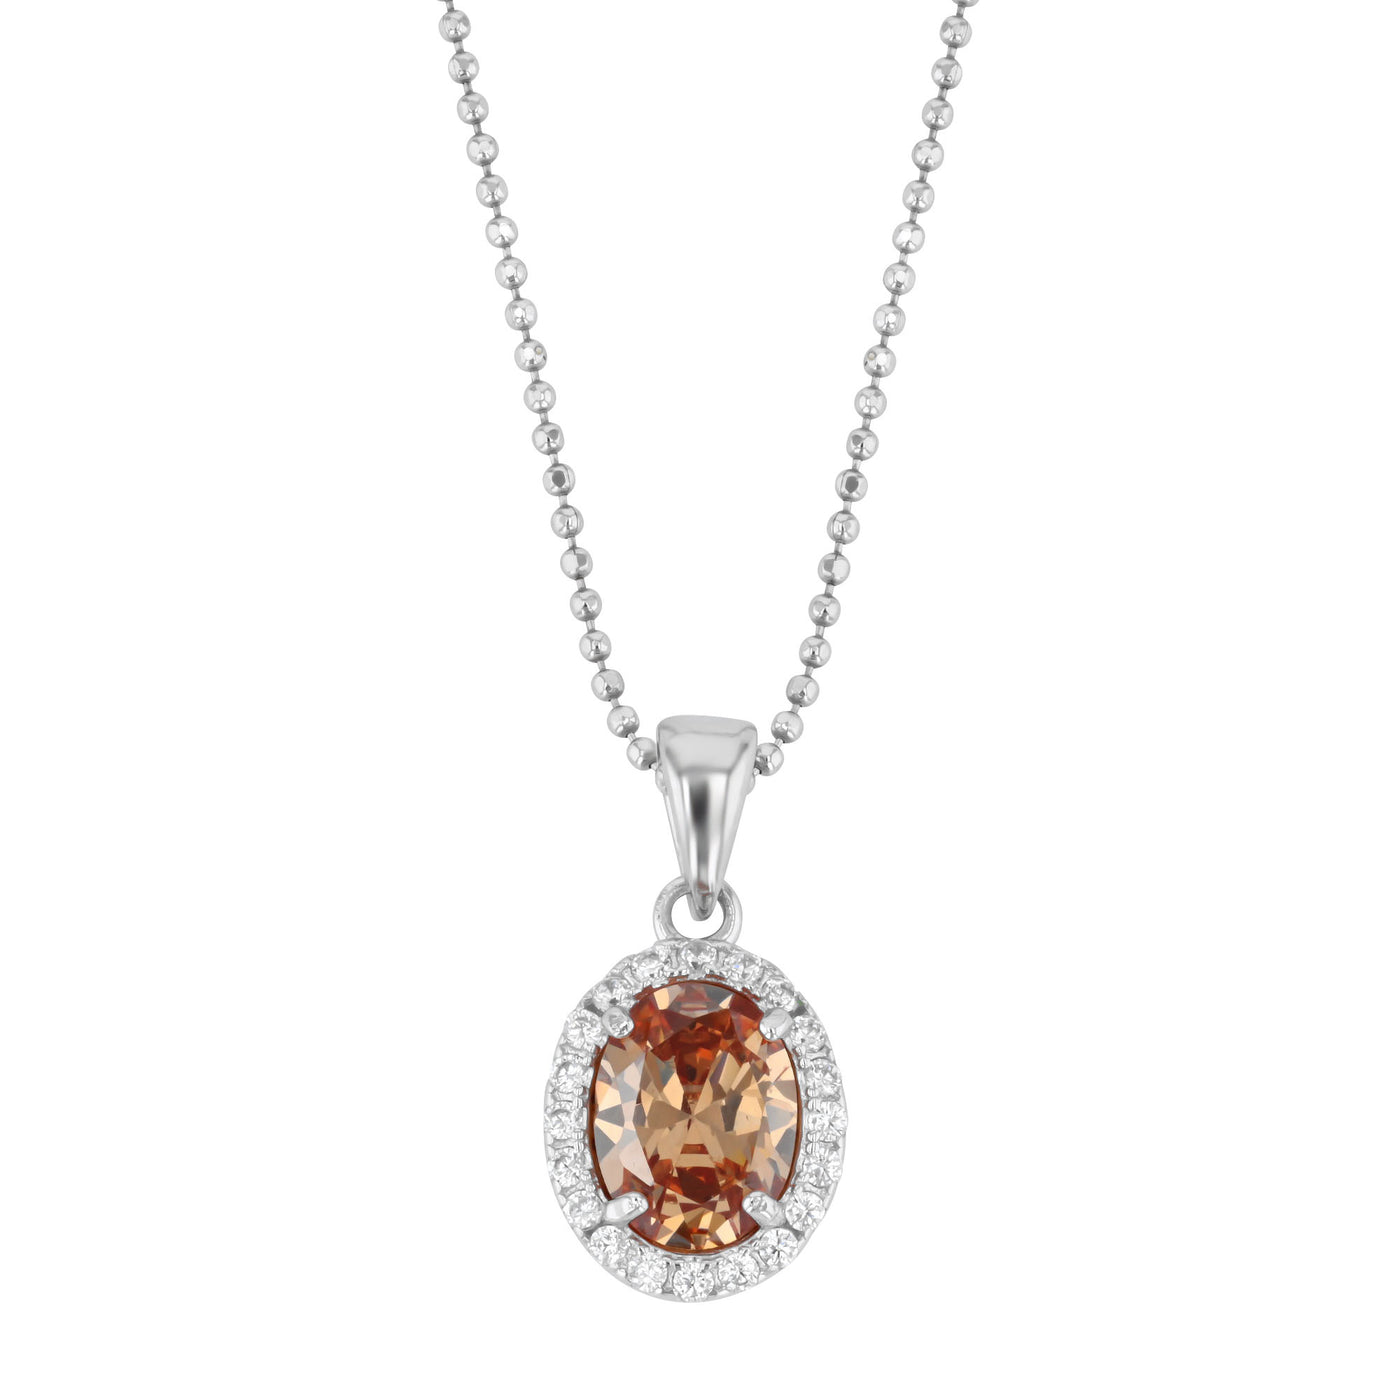 Rebecca Sloane Silver Oval with Faceted Champagne CZ Pendant